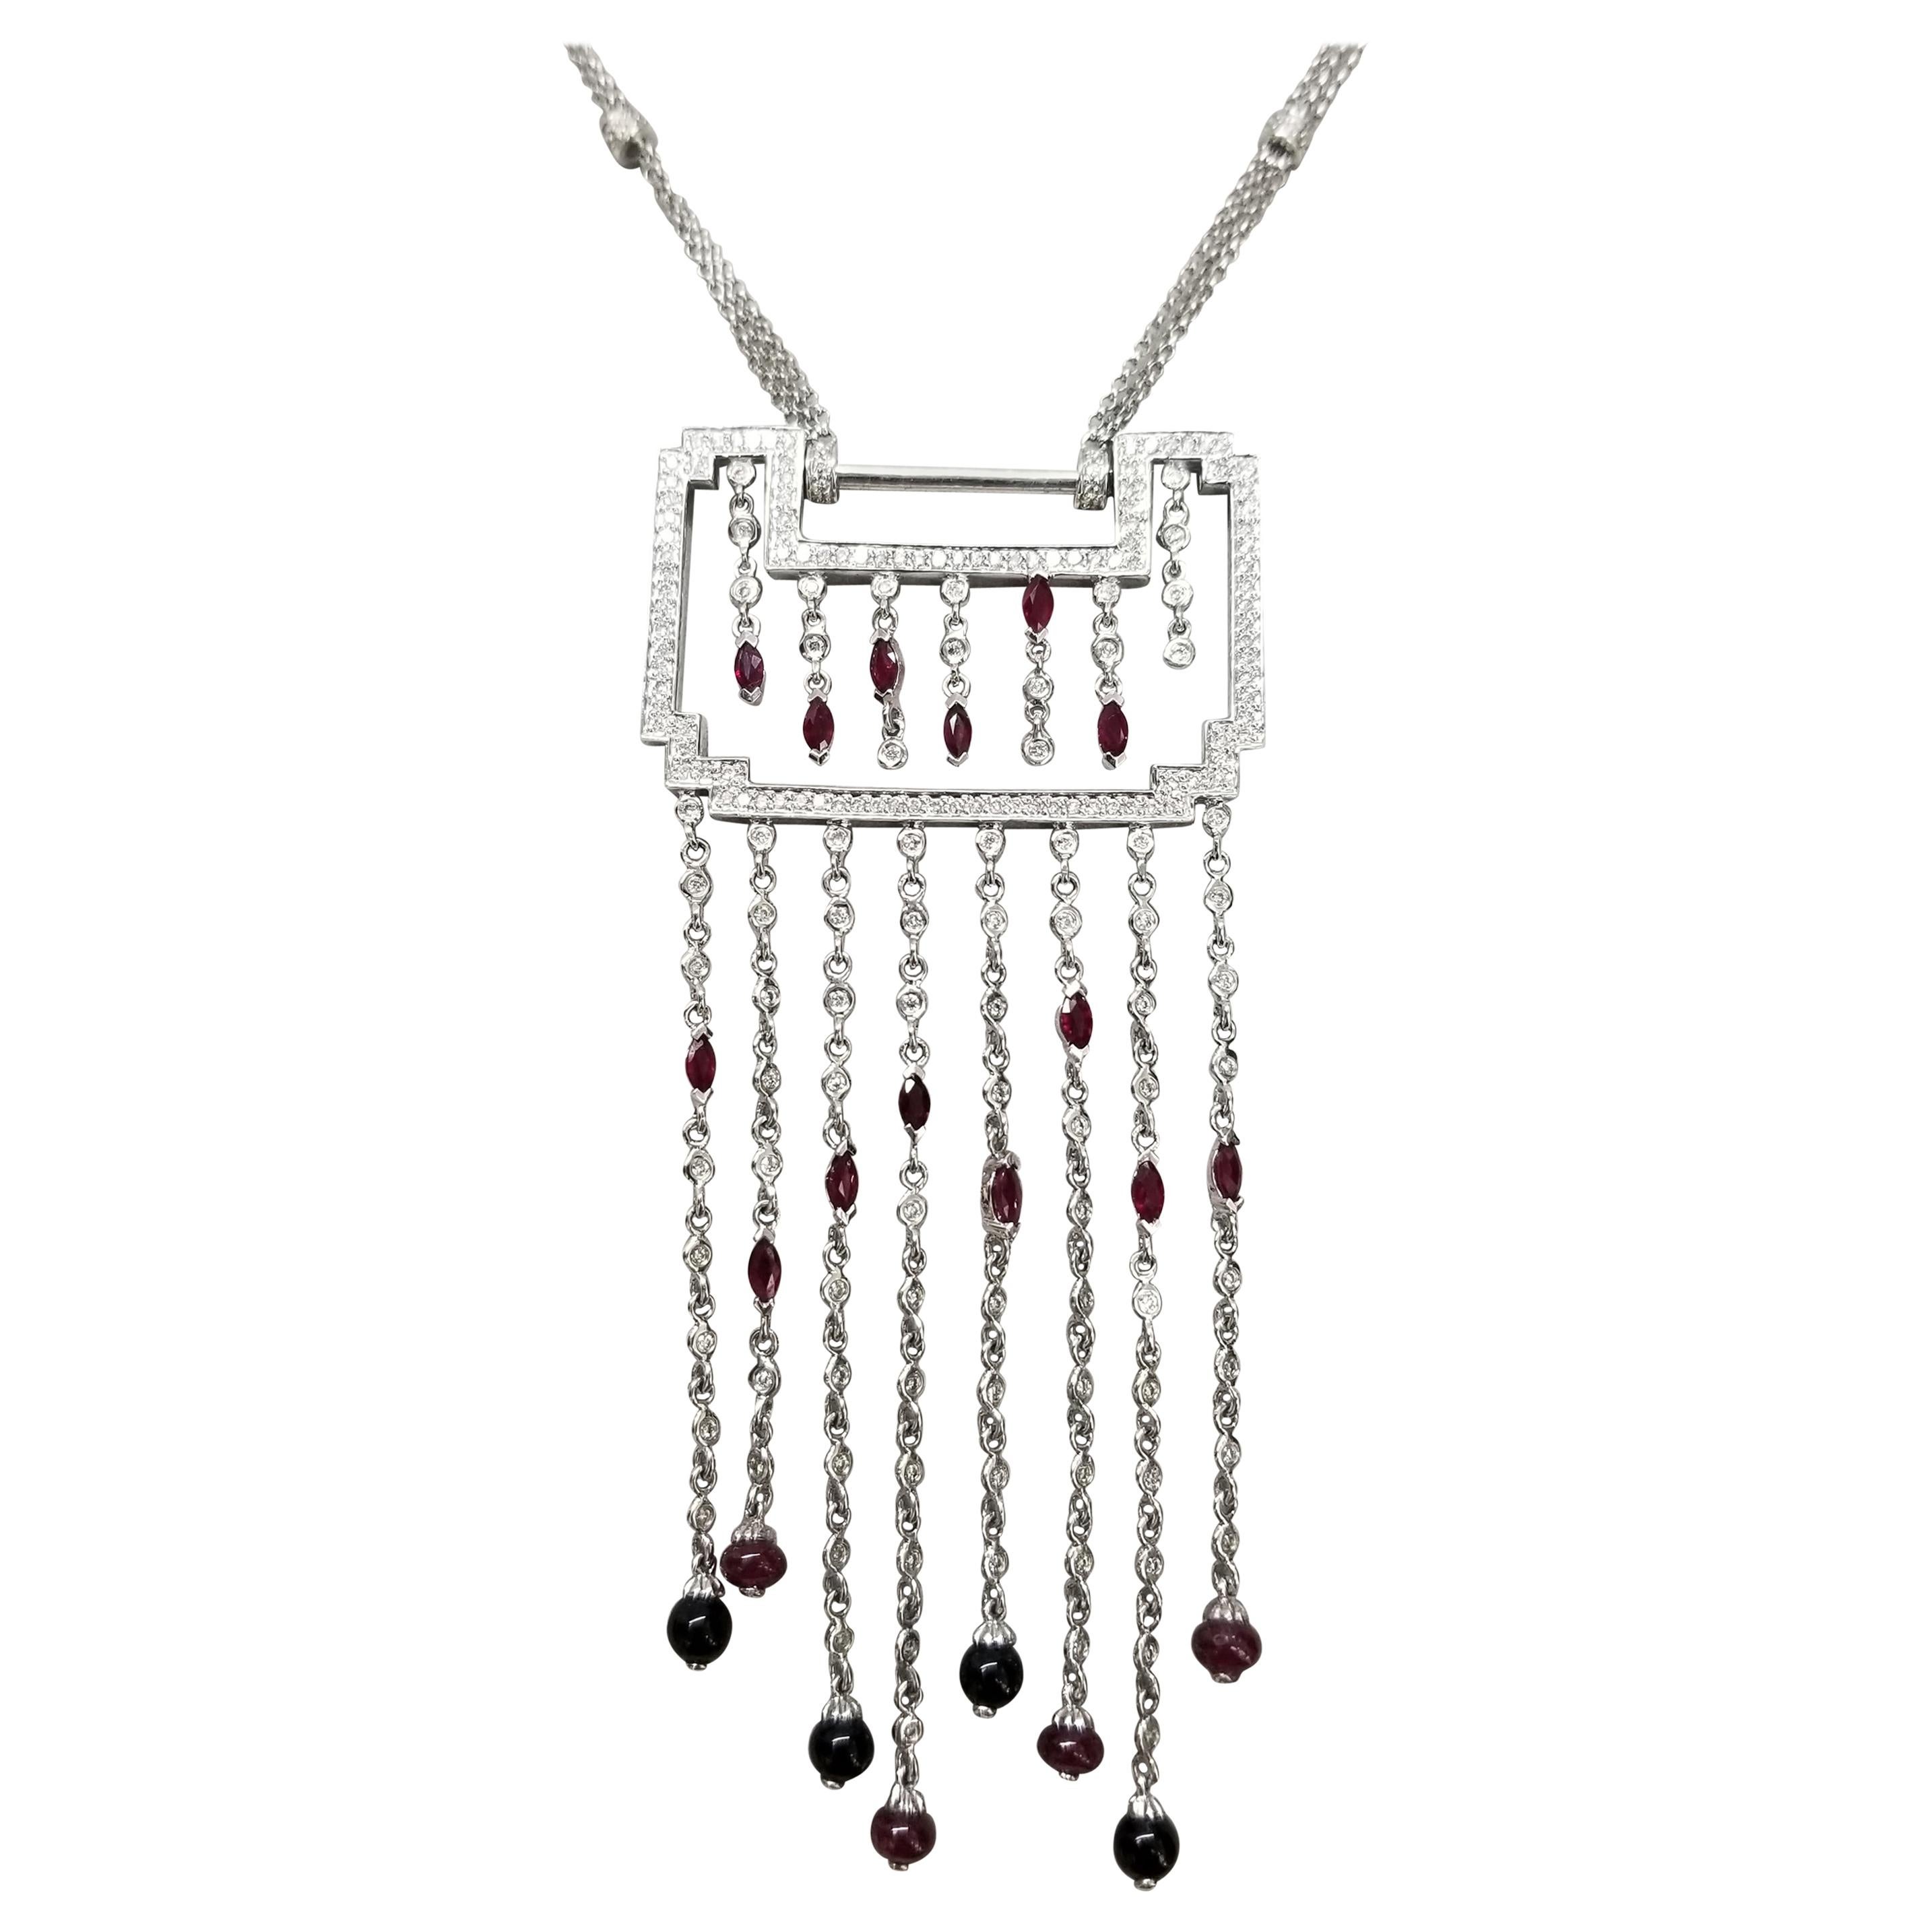 Art Deco Inspired Diamond 2.20 Carat and Ruby 1.10 Carat Necklace